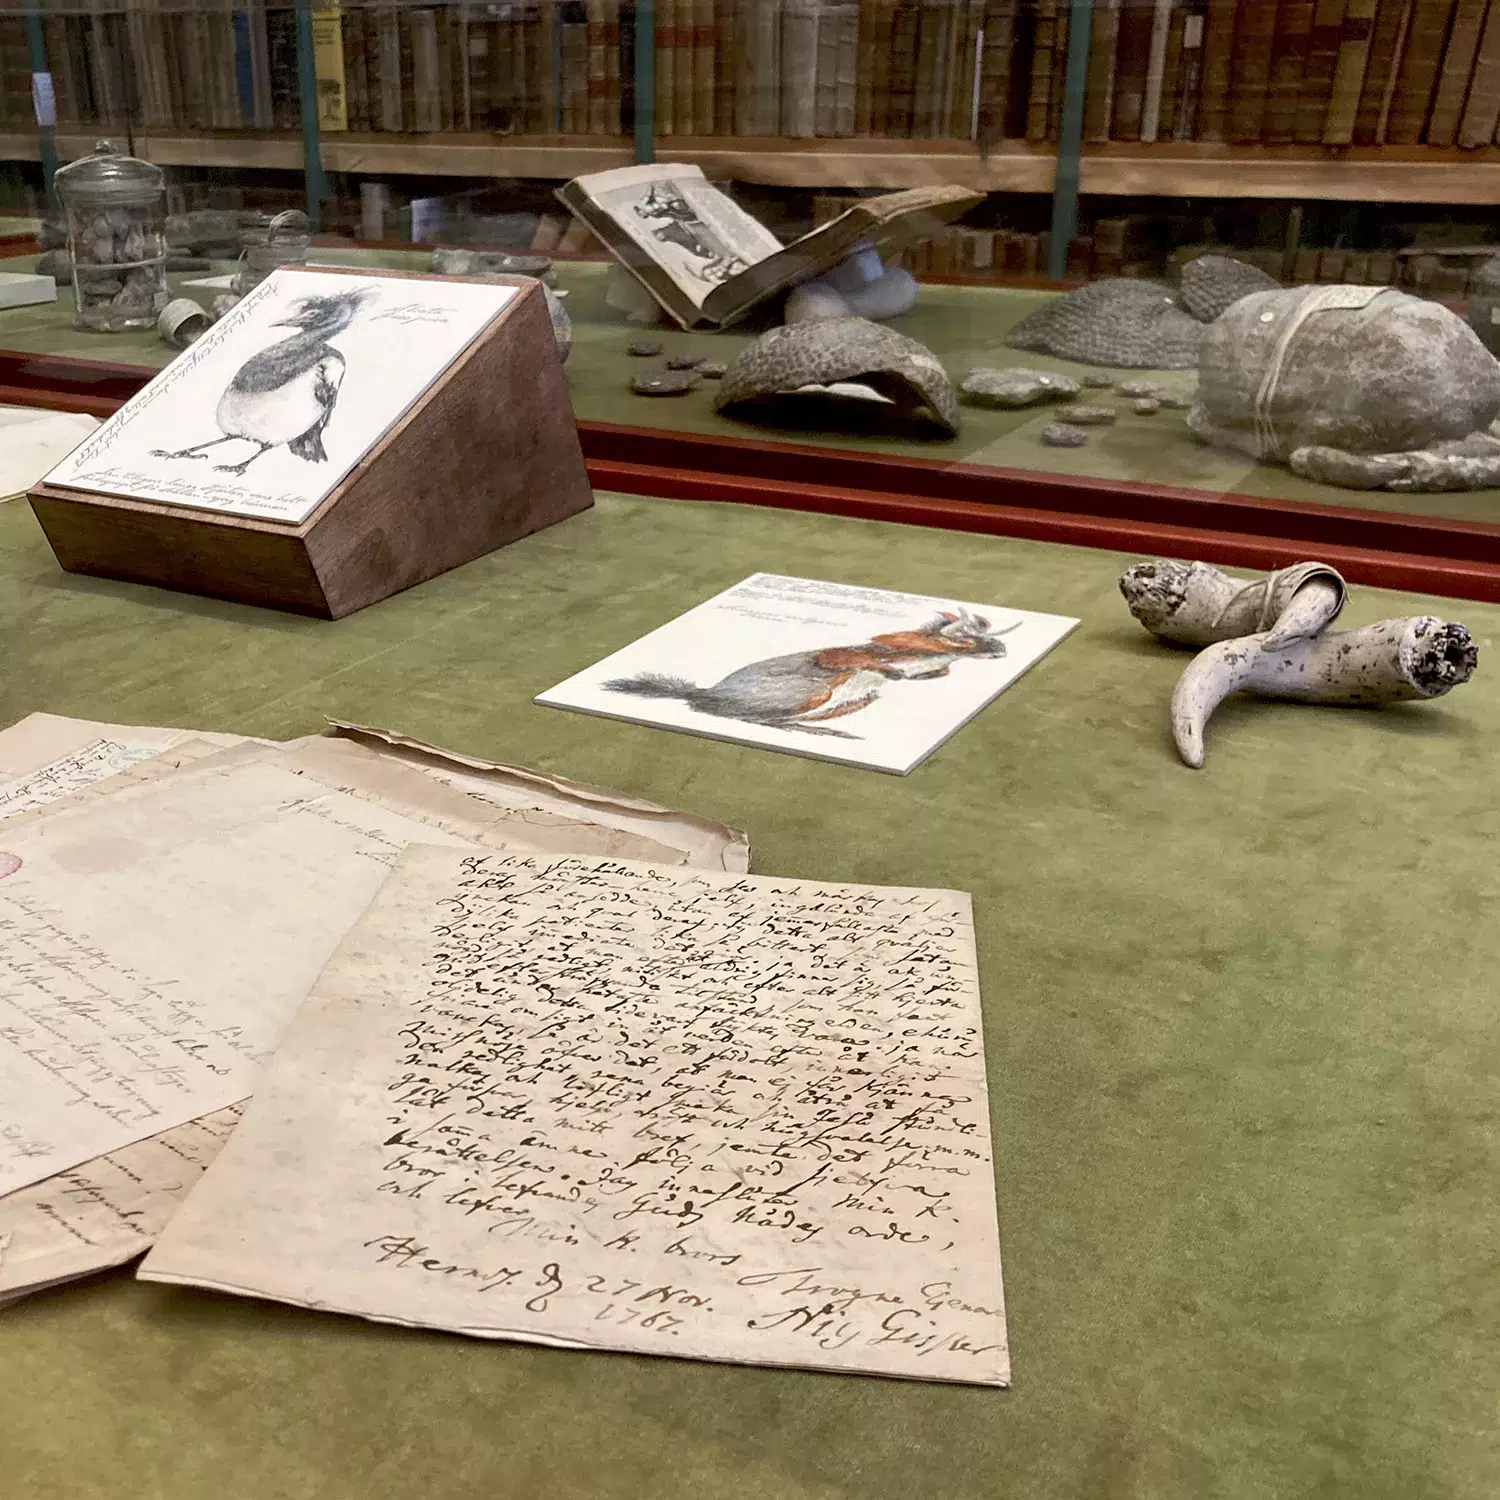 Old medical collections of texts and animals.